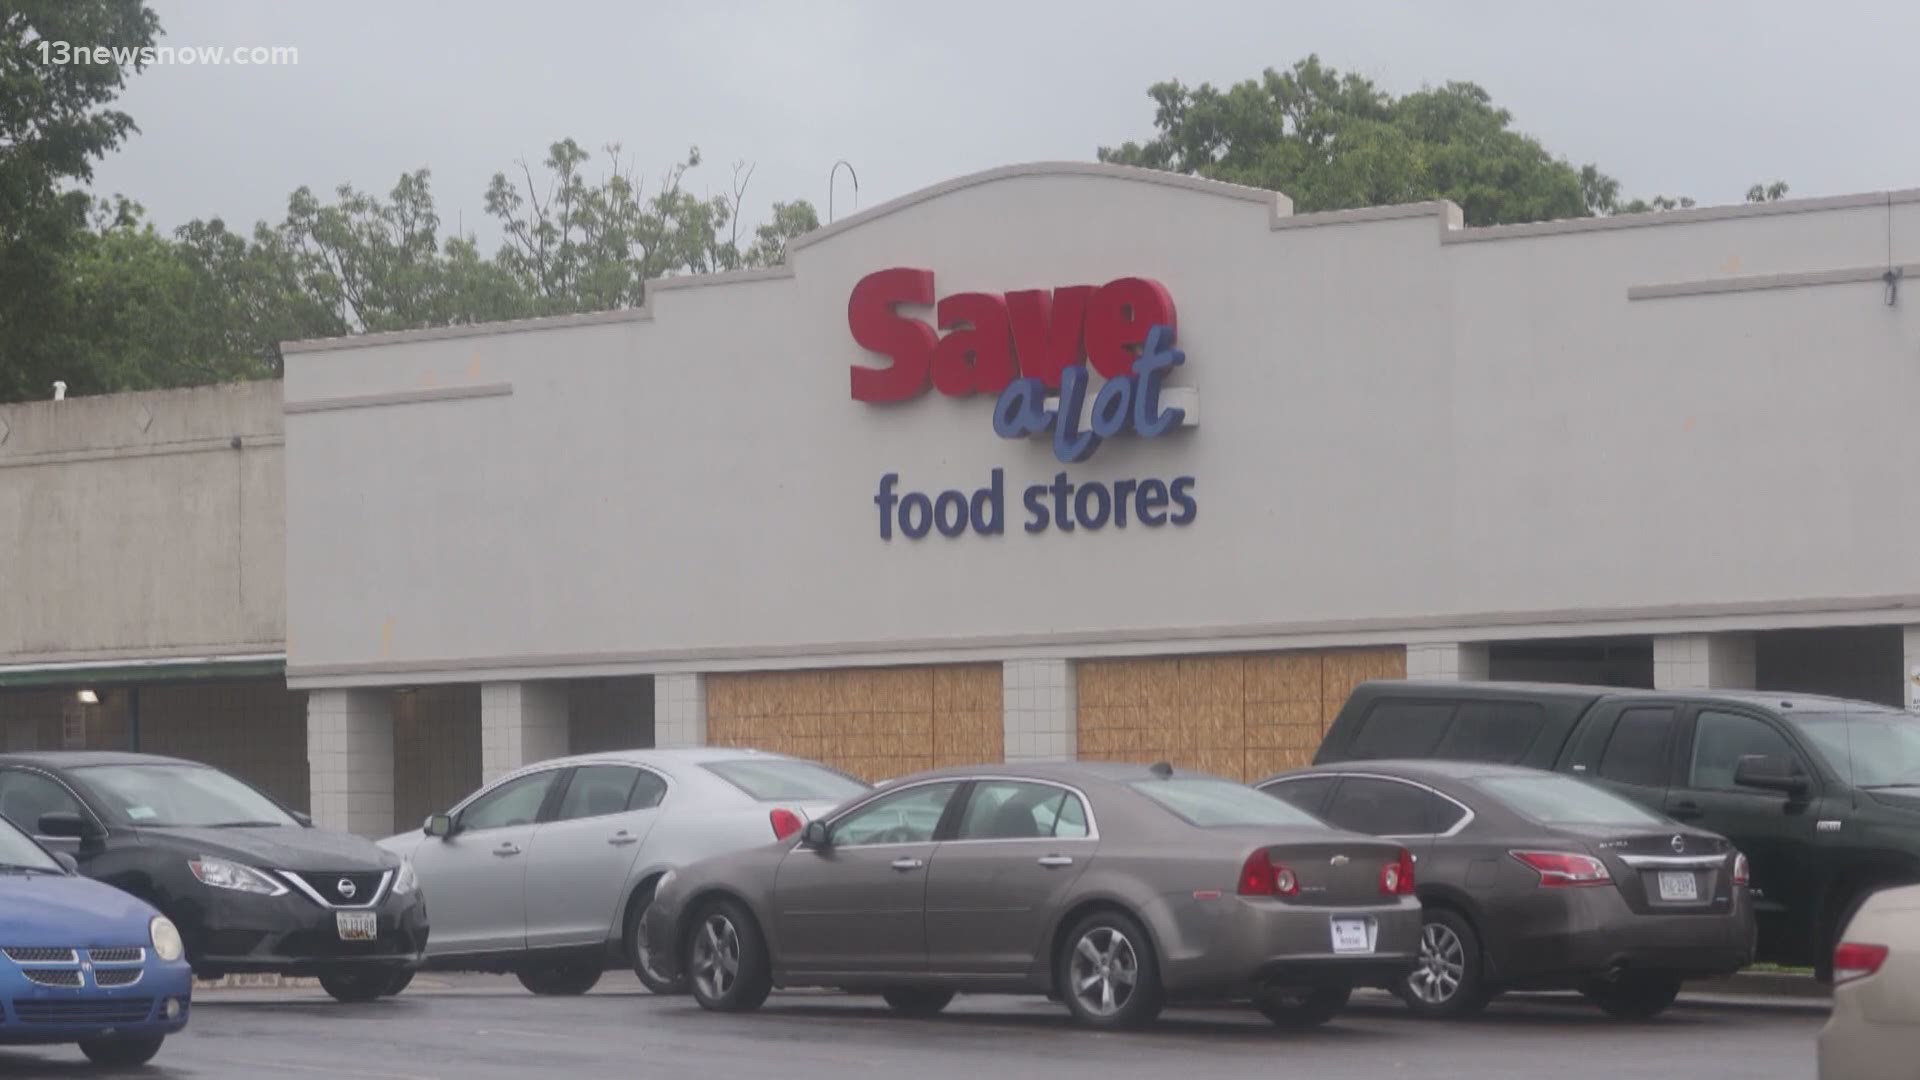 The Save A Lot store near downtown Norfolk will close on Saturday, creating a 'food desert' for about half of the city's public housing residents.